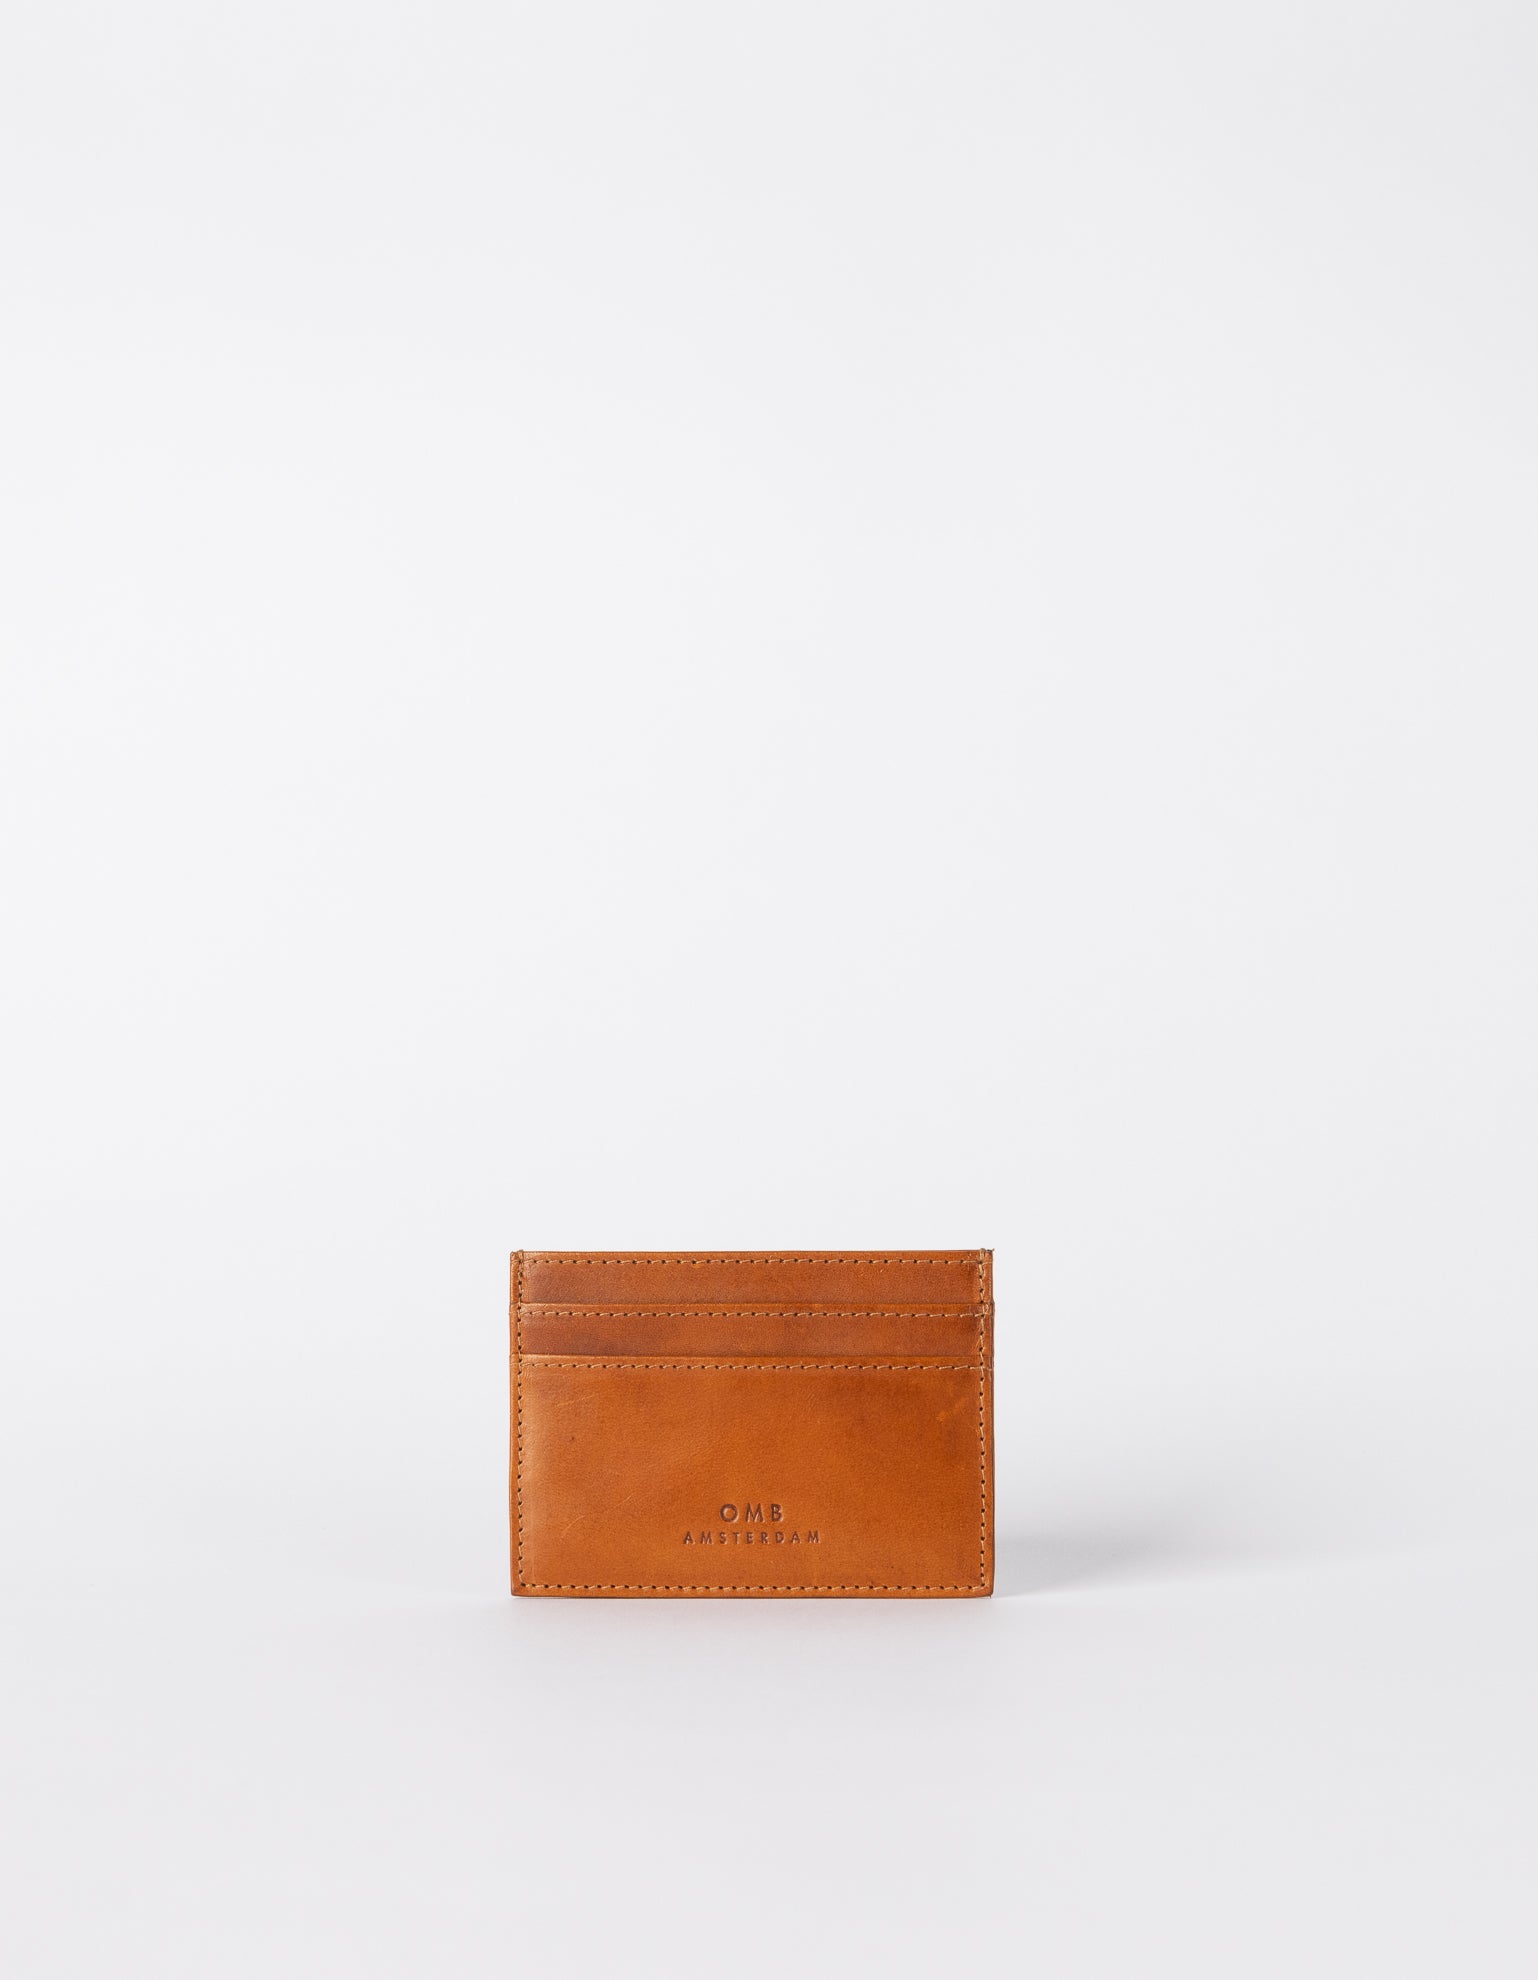 Marks Cardcase Cognac Classic Leather. Square leather wallet, card case for bank cards. Front product image.